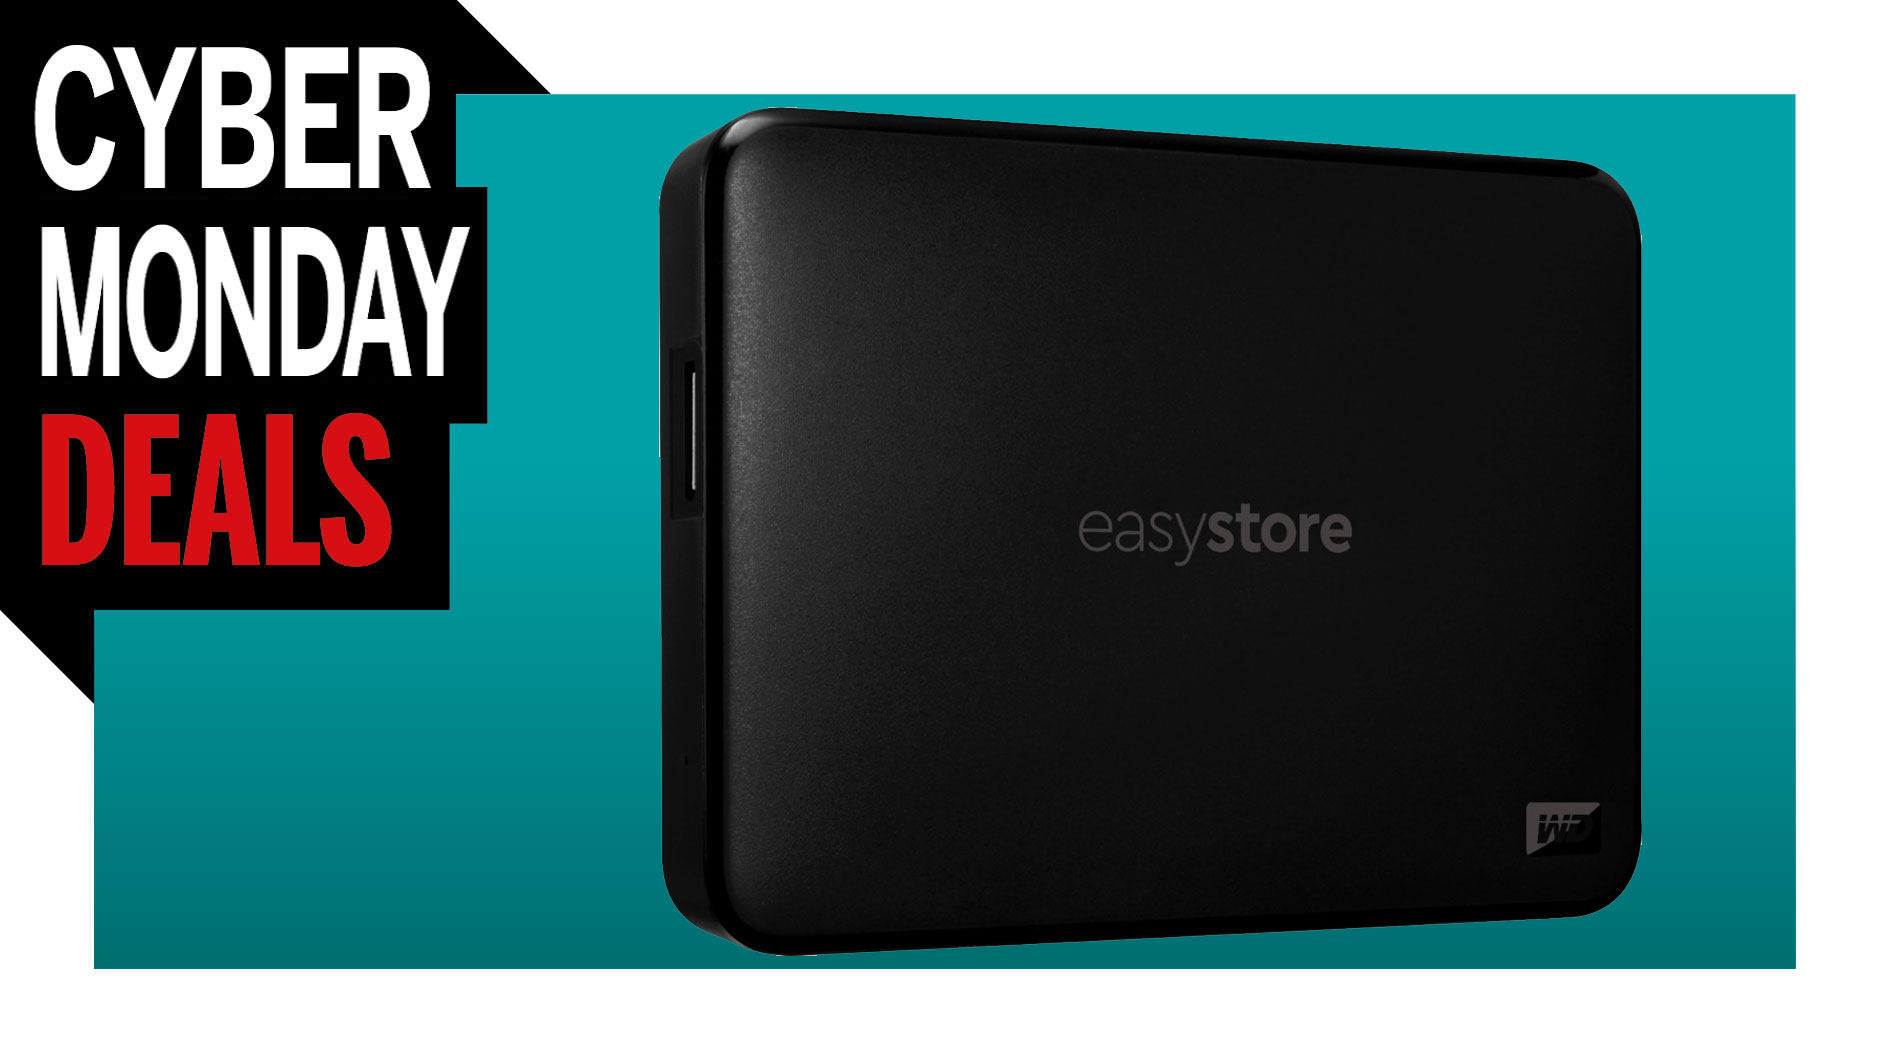  Cyber Monday external hard drive deal: stuff 5TB of storage in your pocket for $90 